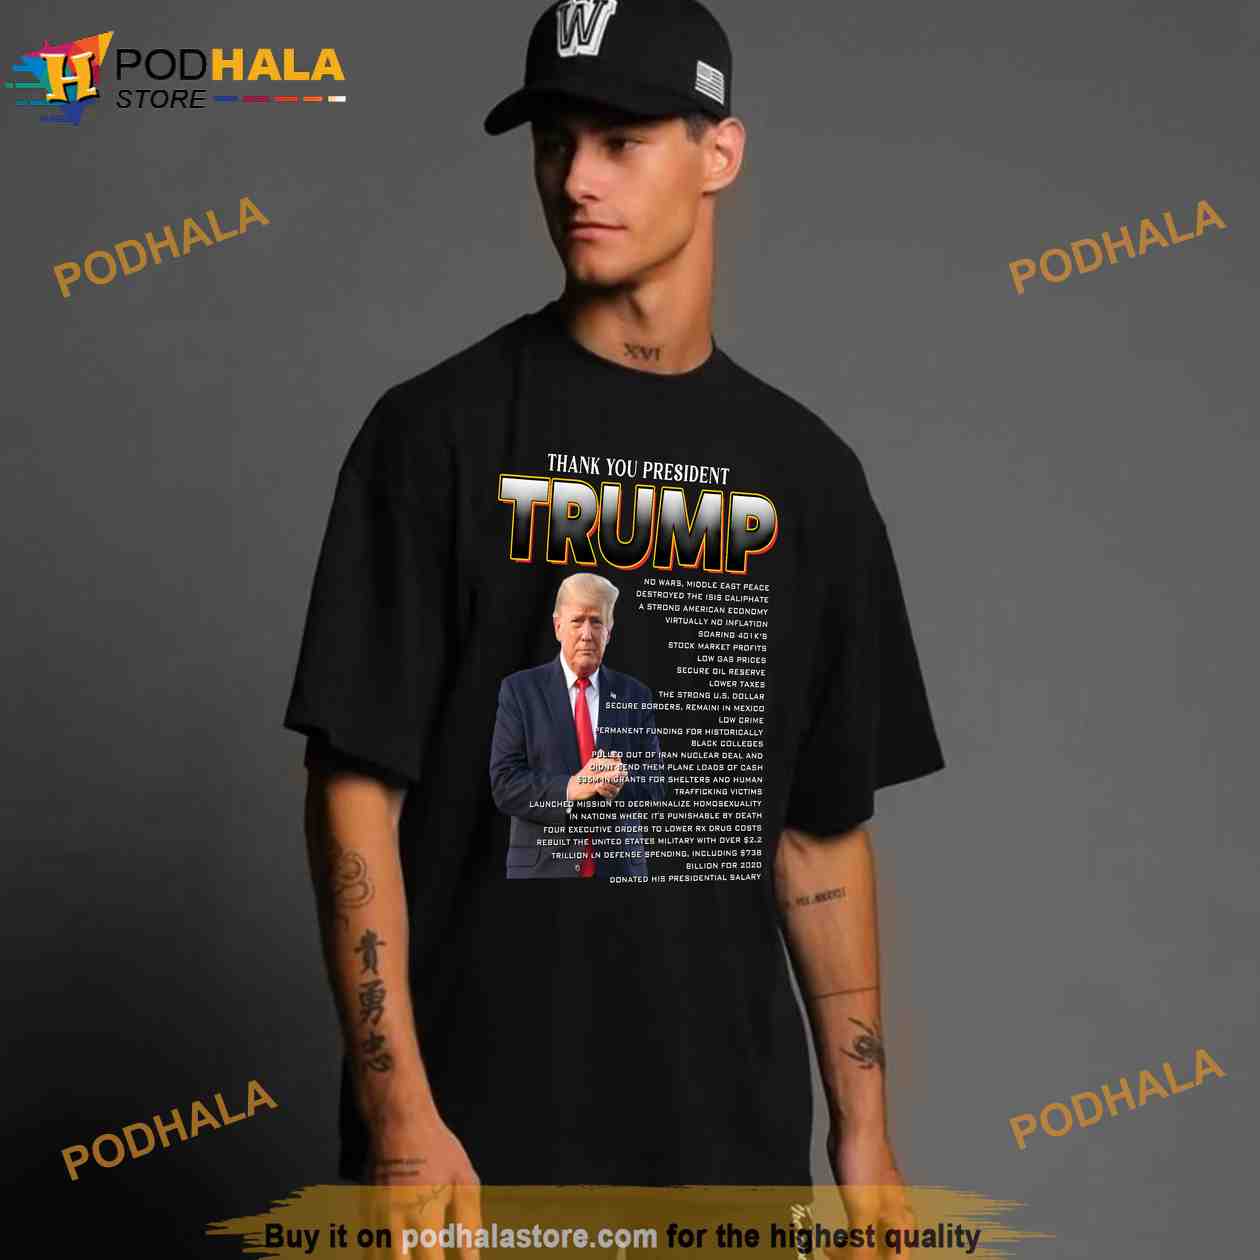 Thank You President Trump Shirt, A Strong American Economy, Donald Trump Gifts